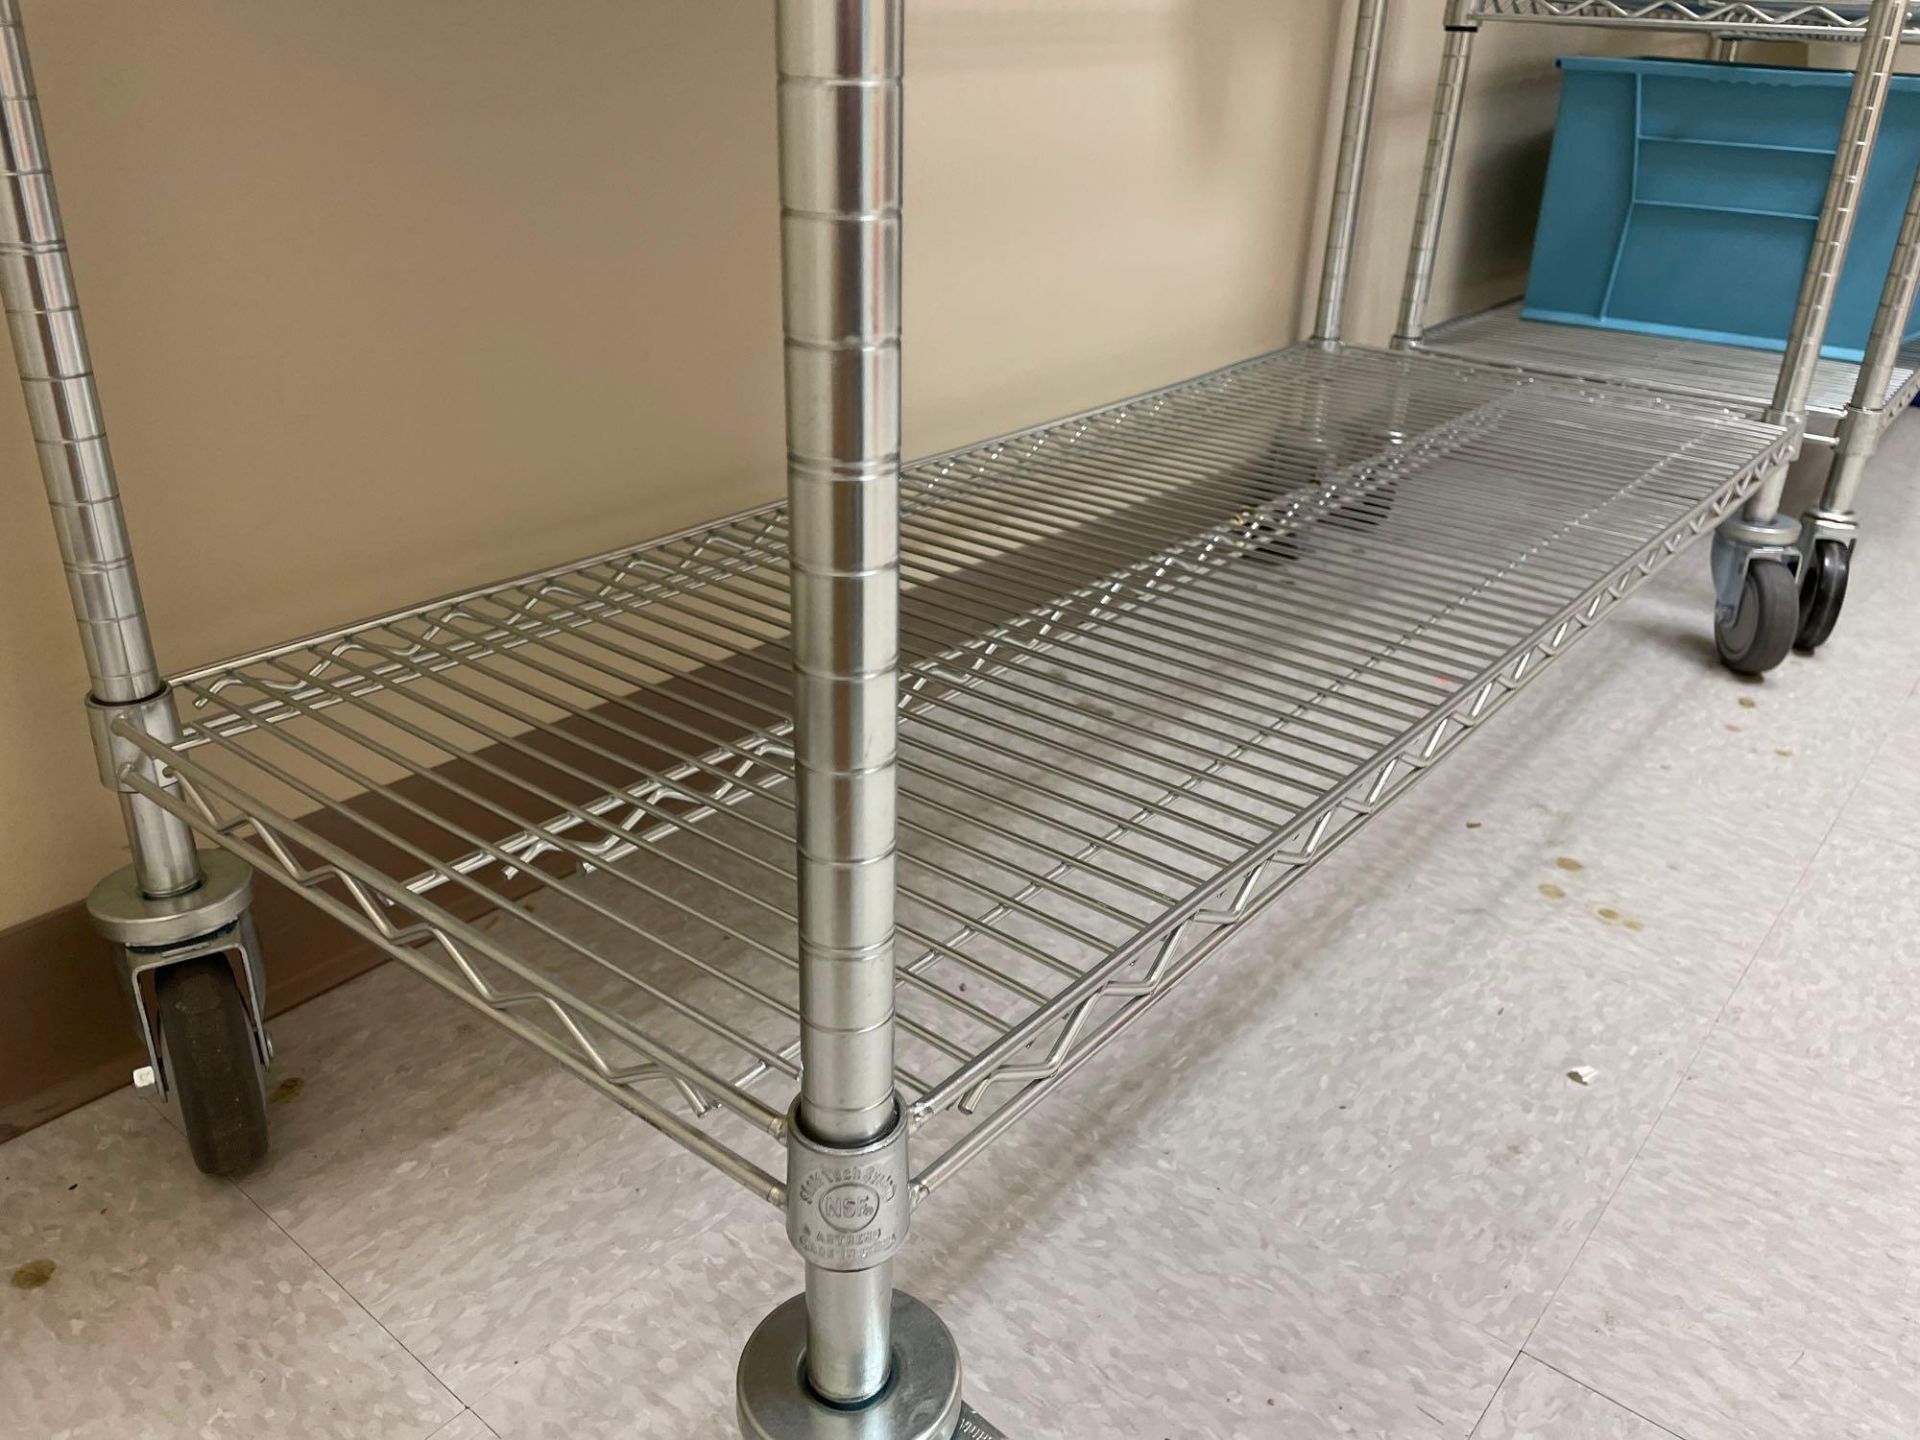 5-Tier Wire Shelving Unit on Casters - Image 3 of 3